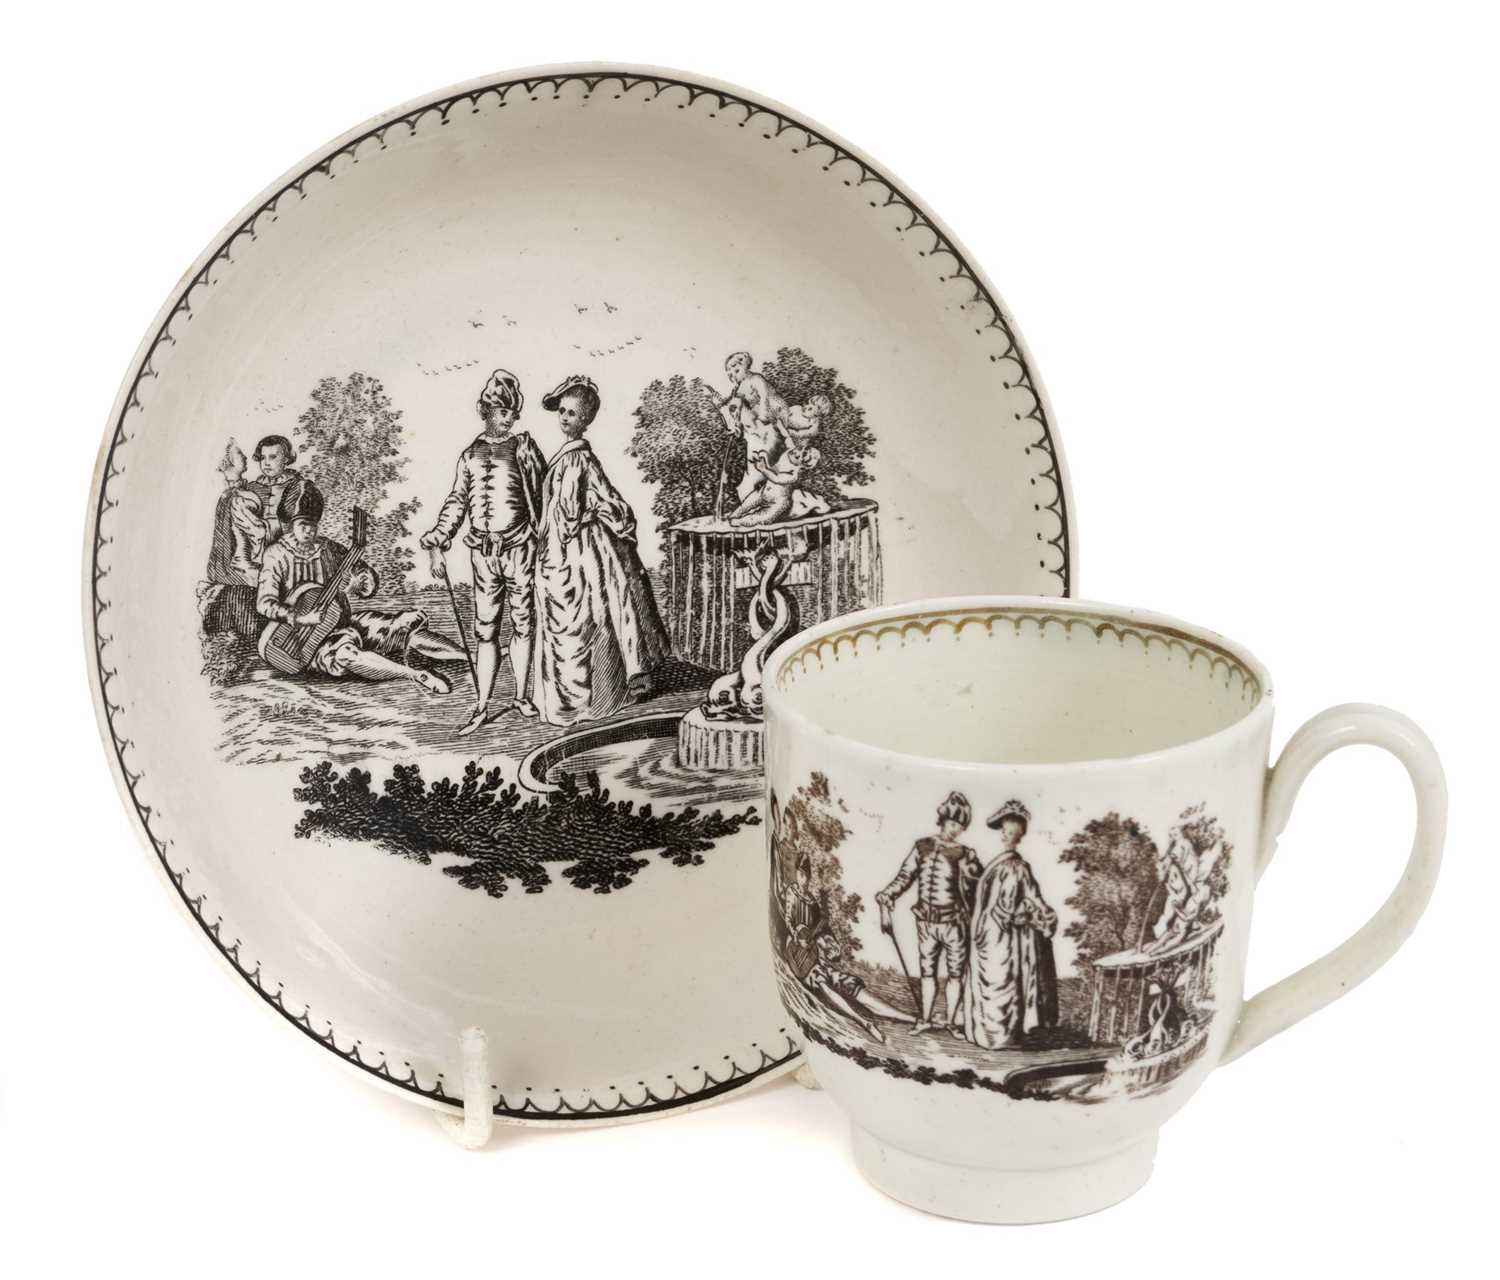 Lot 101 - A rare Pennington Liverpool coffee cup and saucer, printed in black with La Cascade and Seranade, after Watteau, circa 1780. Provenance; Bernard Watney Collection. With Roderick Jellicoe